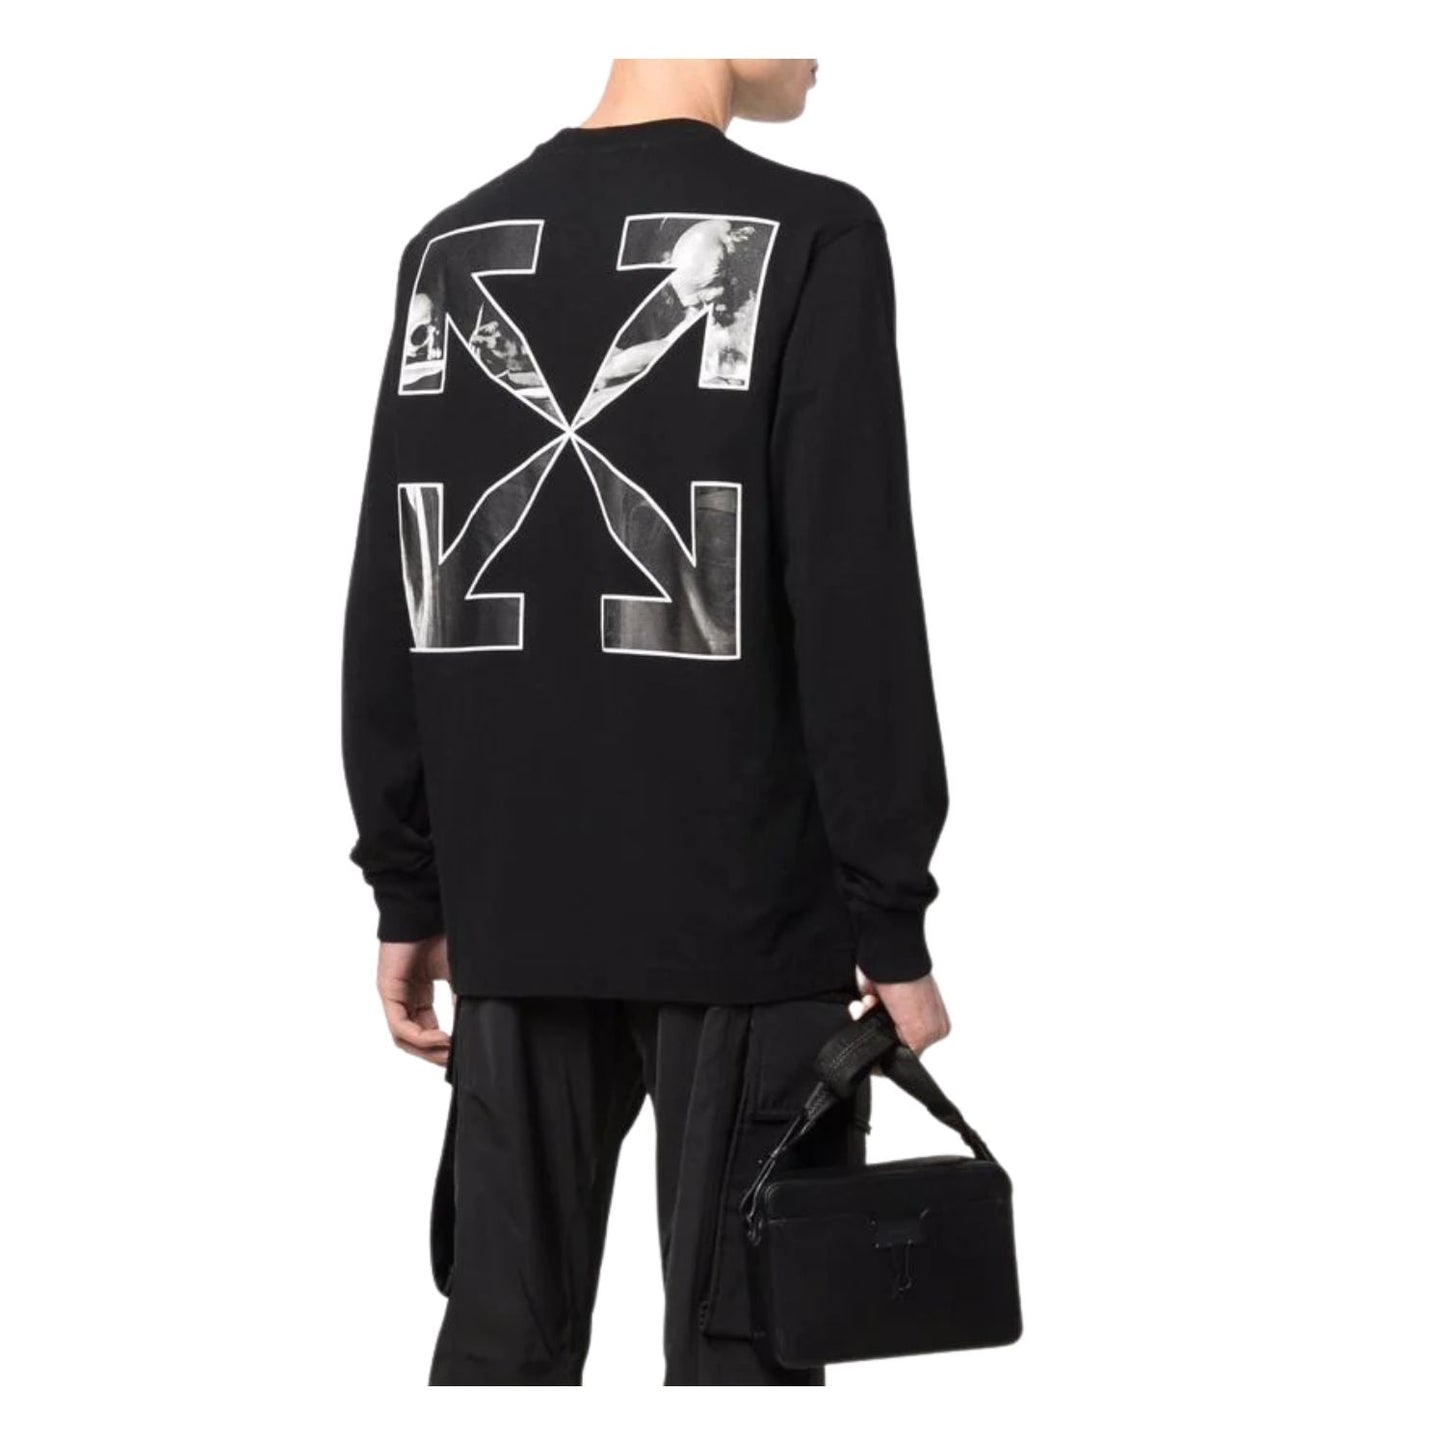 Off-white Caravag Arrow Skate L/s Tee Mens Style : Omab064c99jer00